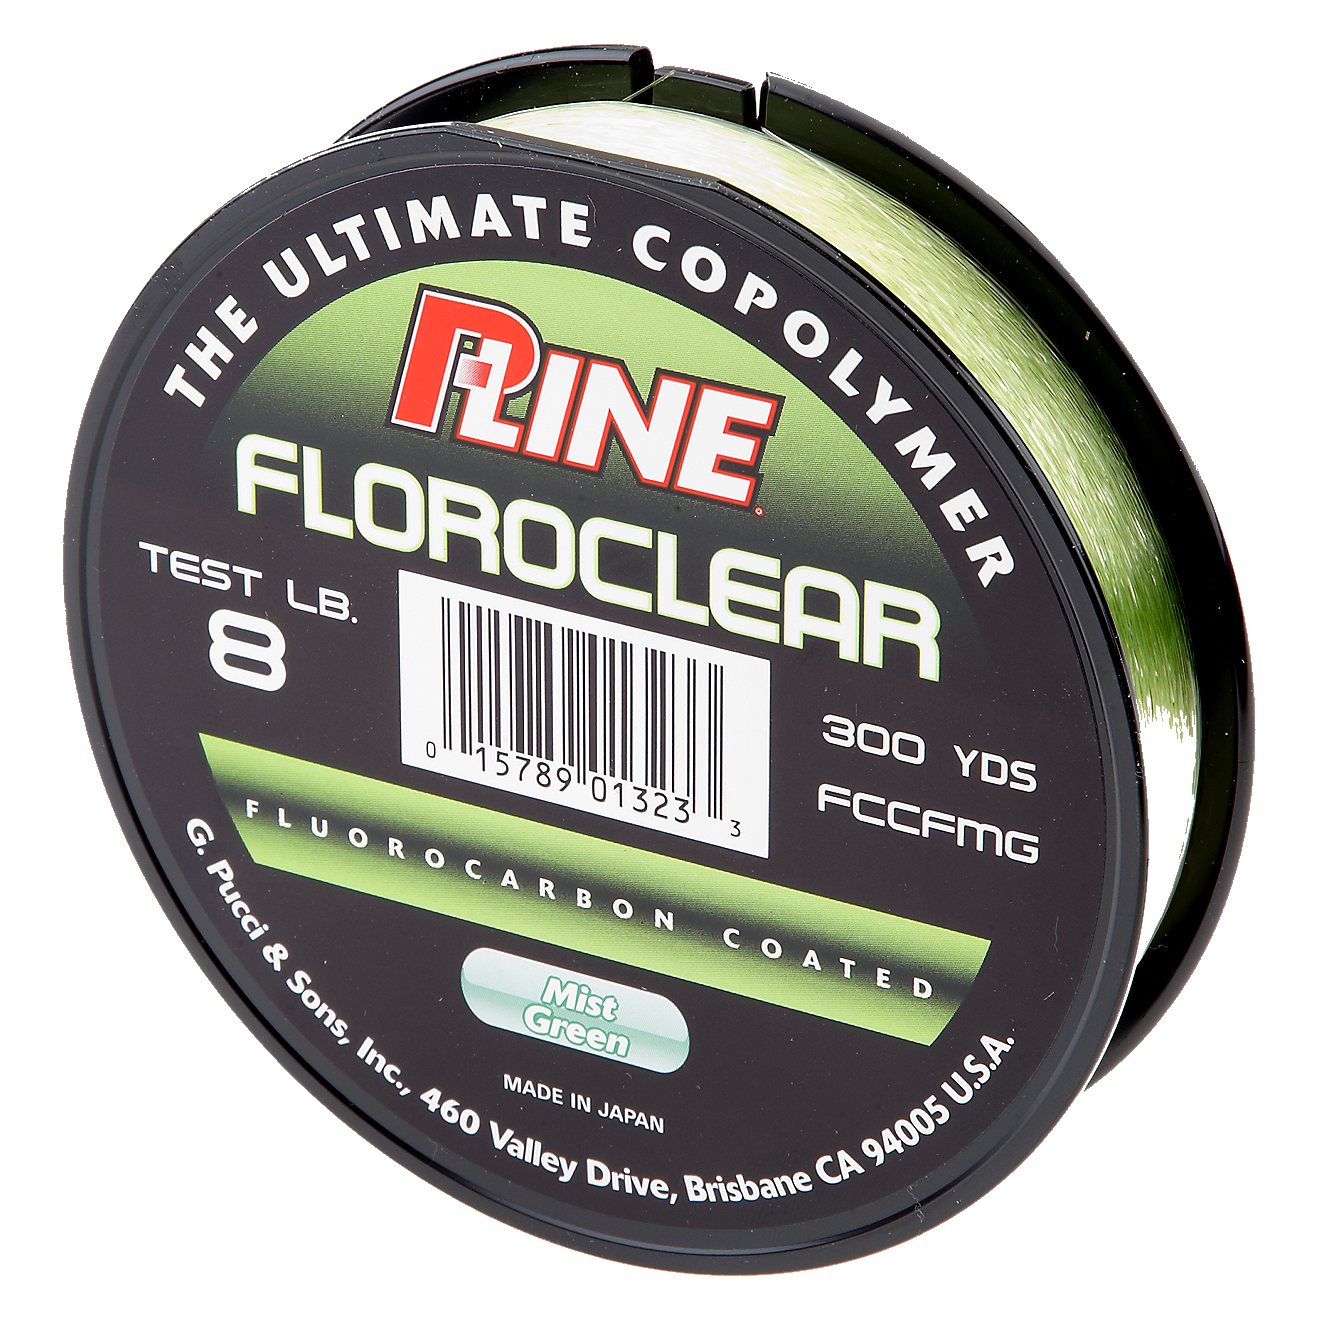 P-Line® Floroclear 8 lb. - 300 yards Fluorocarbon Fishing Line                                                                  - view number 1